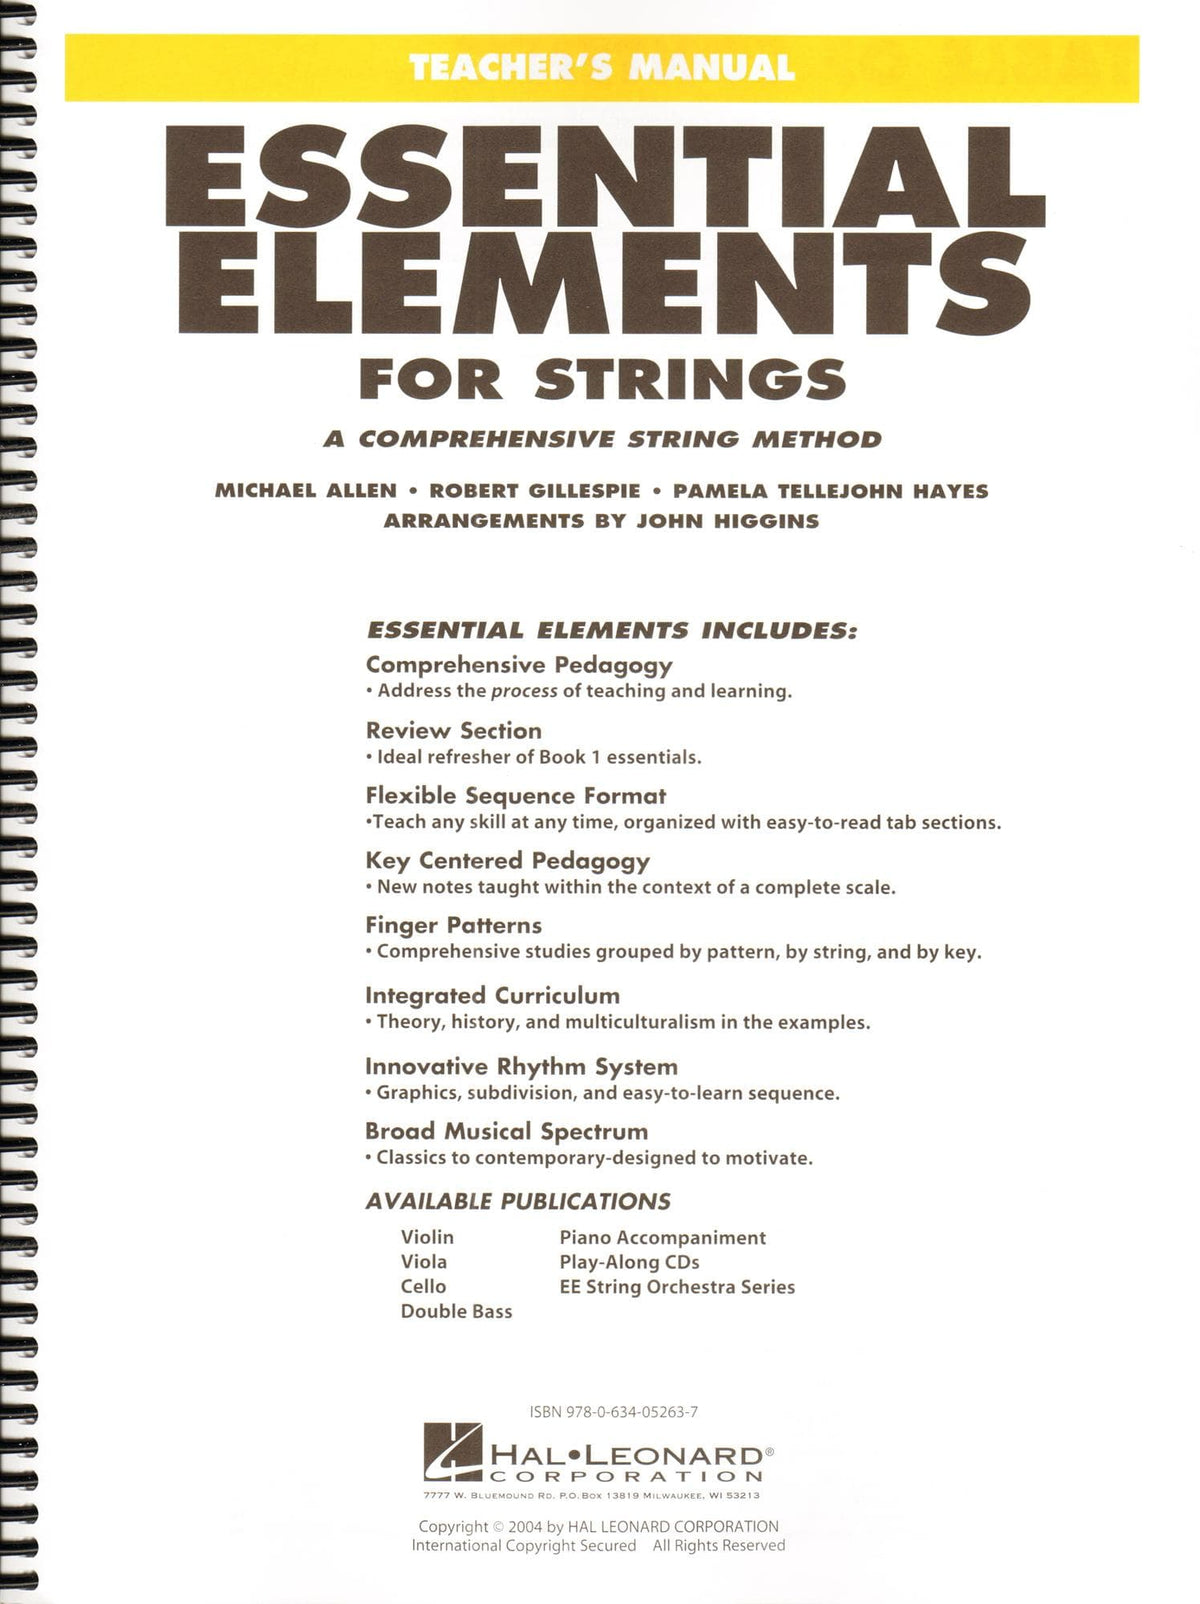 Essential Elements Interactive (formerly 2000) for Strings - Teacher Manual Book 2 - by Allen/Gillespie/Hayes - Hal Leonard Publication